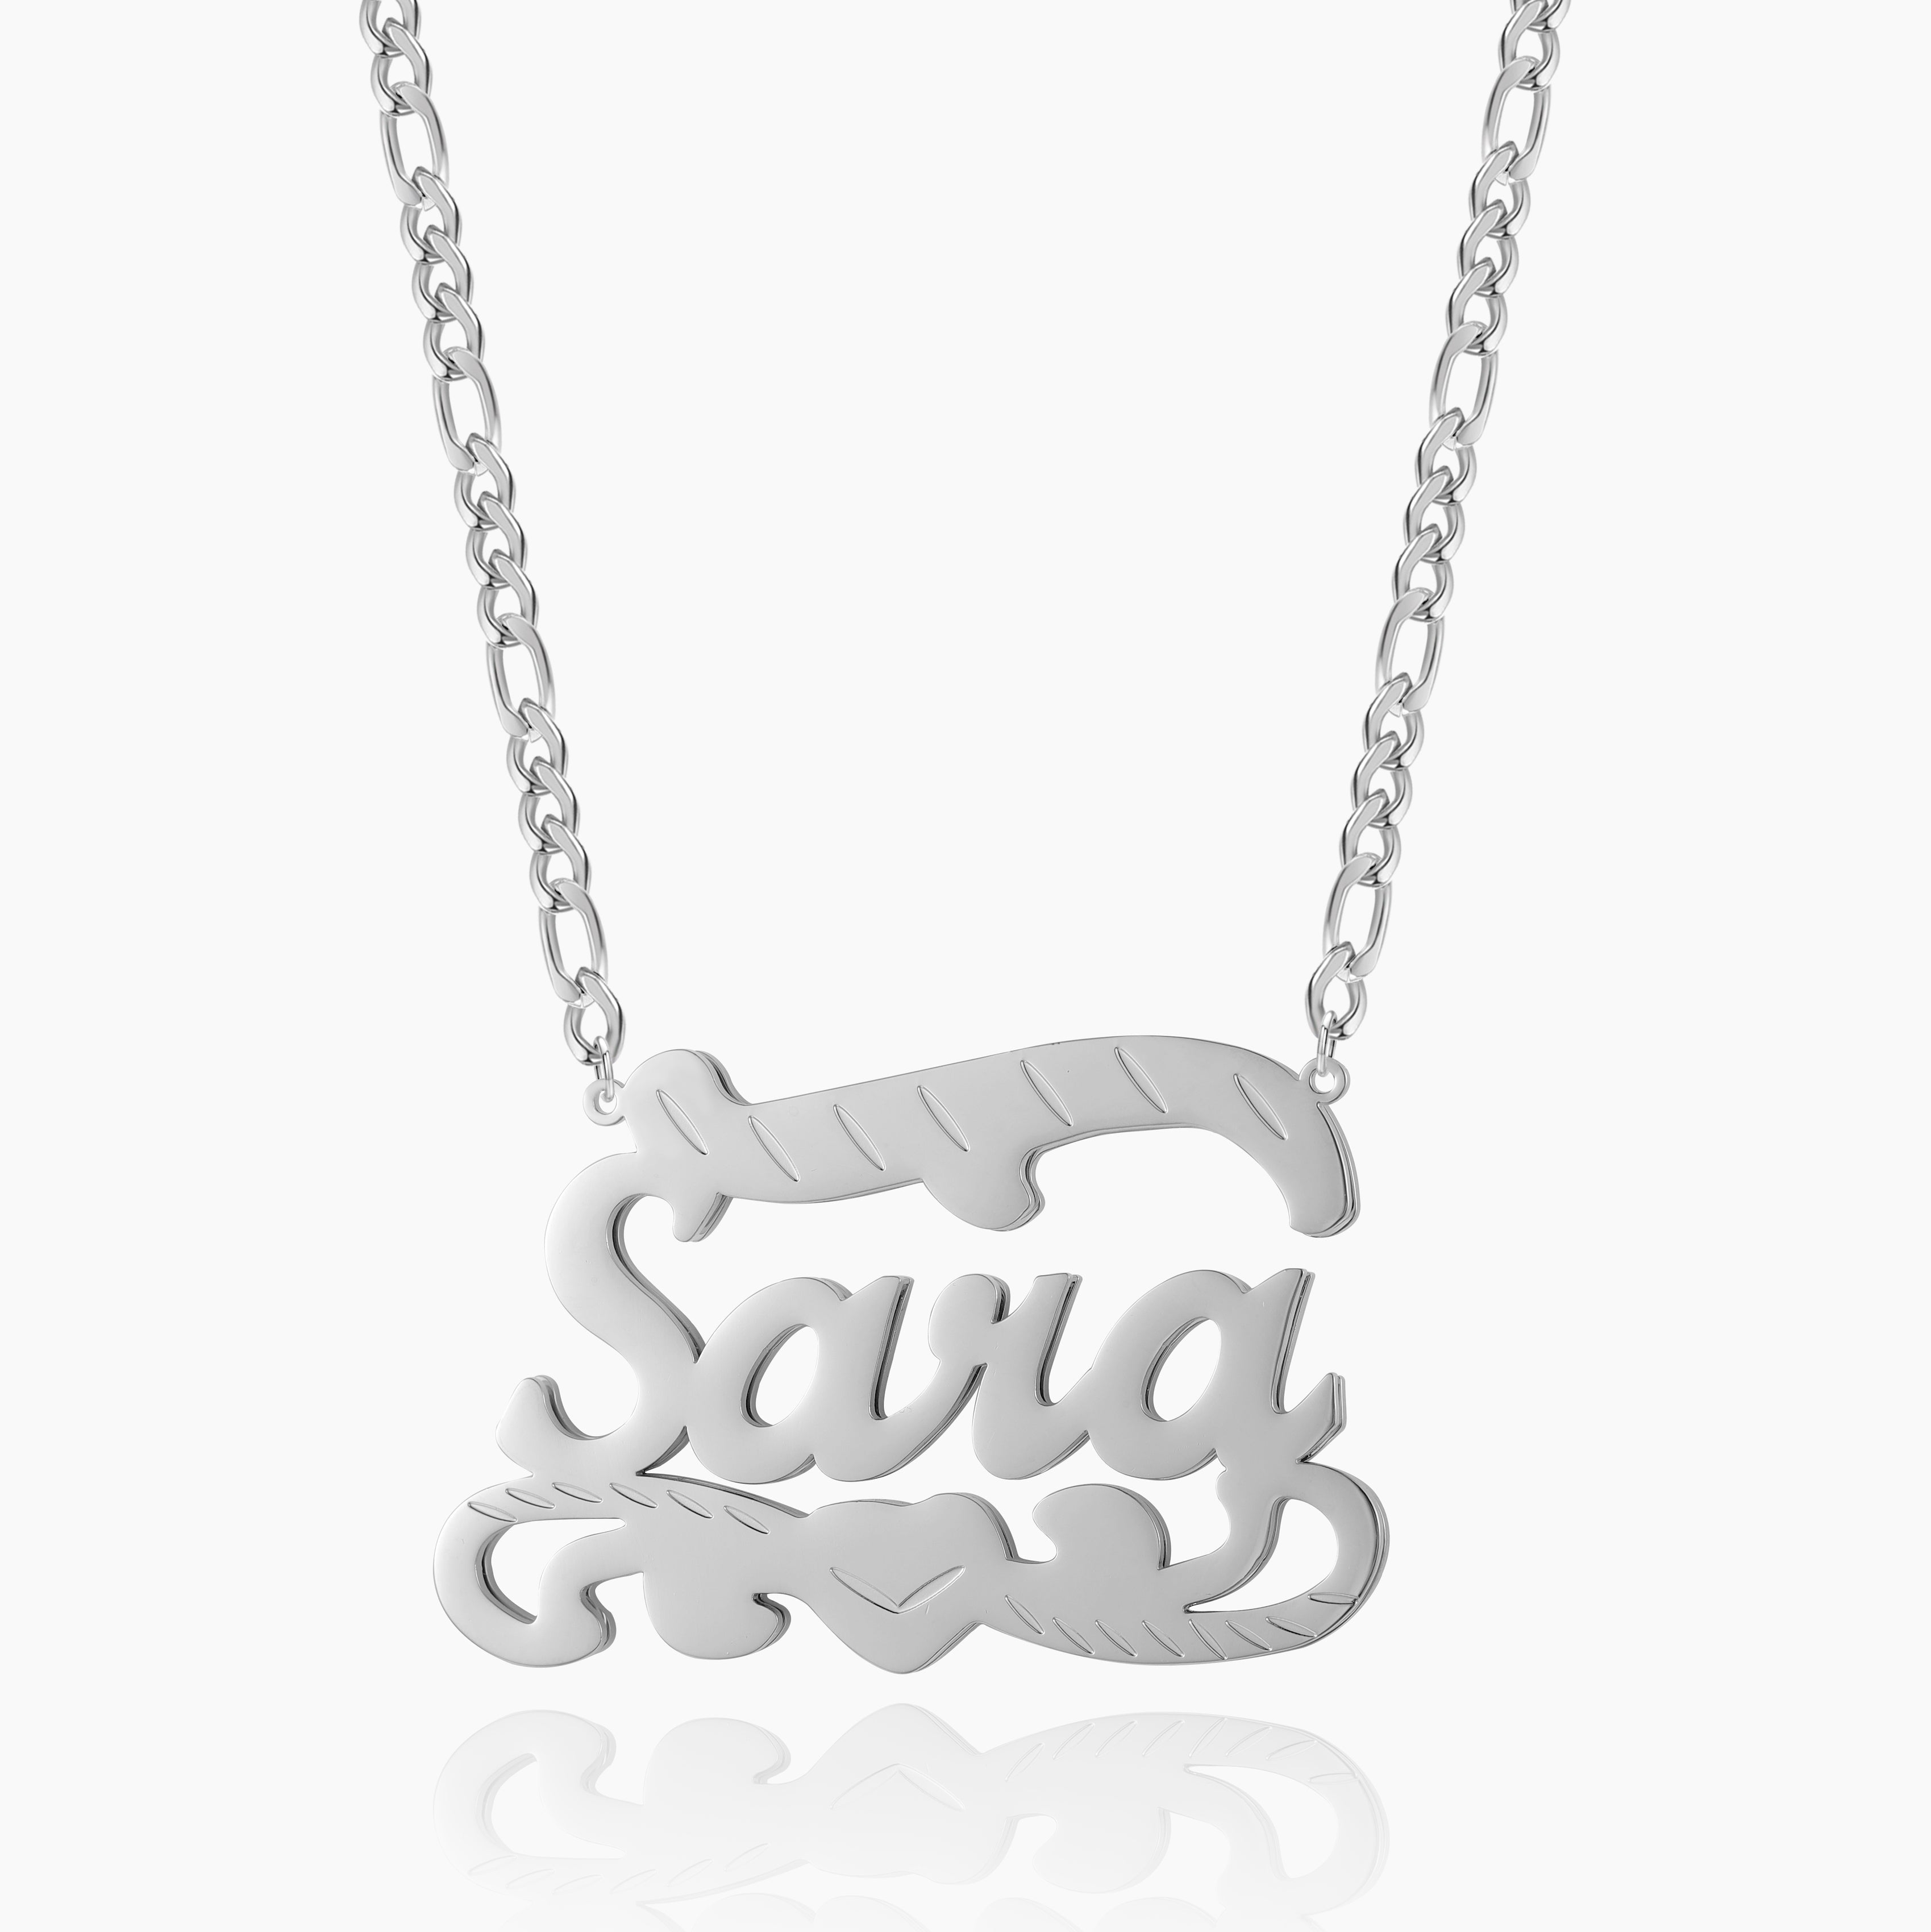 Double Plated Name Heart Necklace w/ Figaro Chain